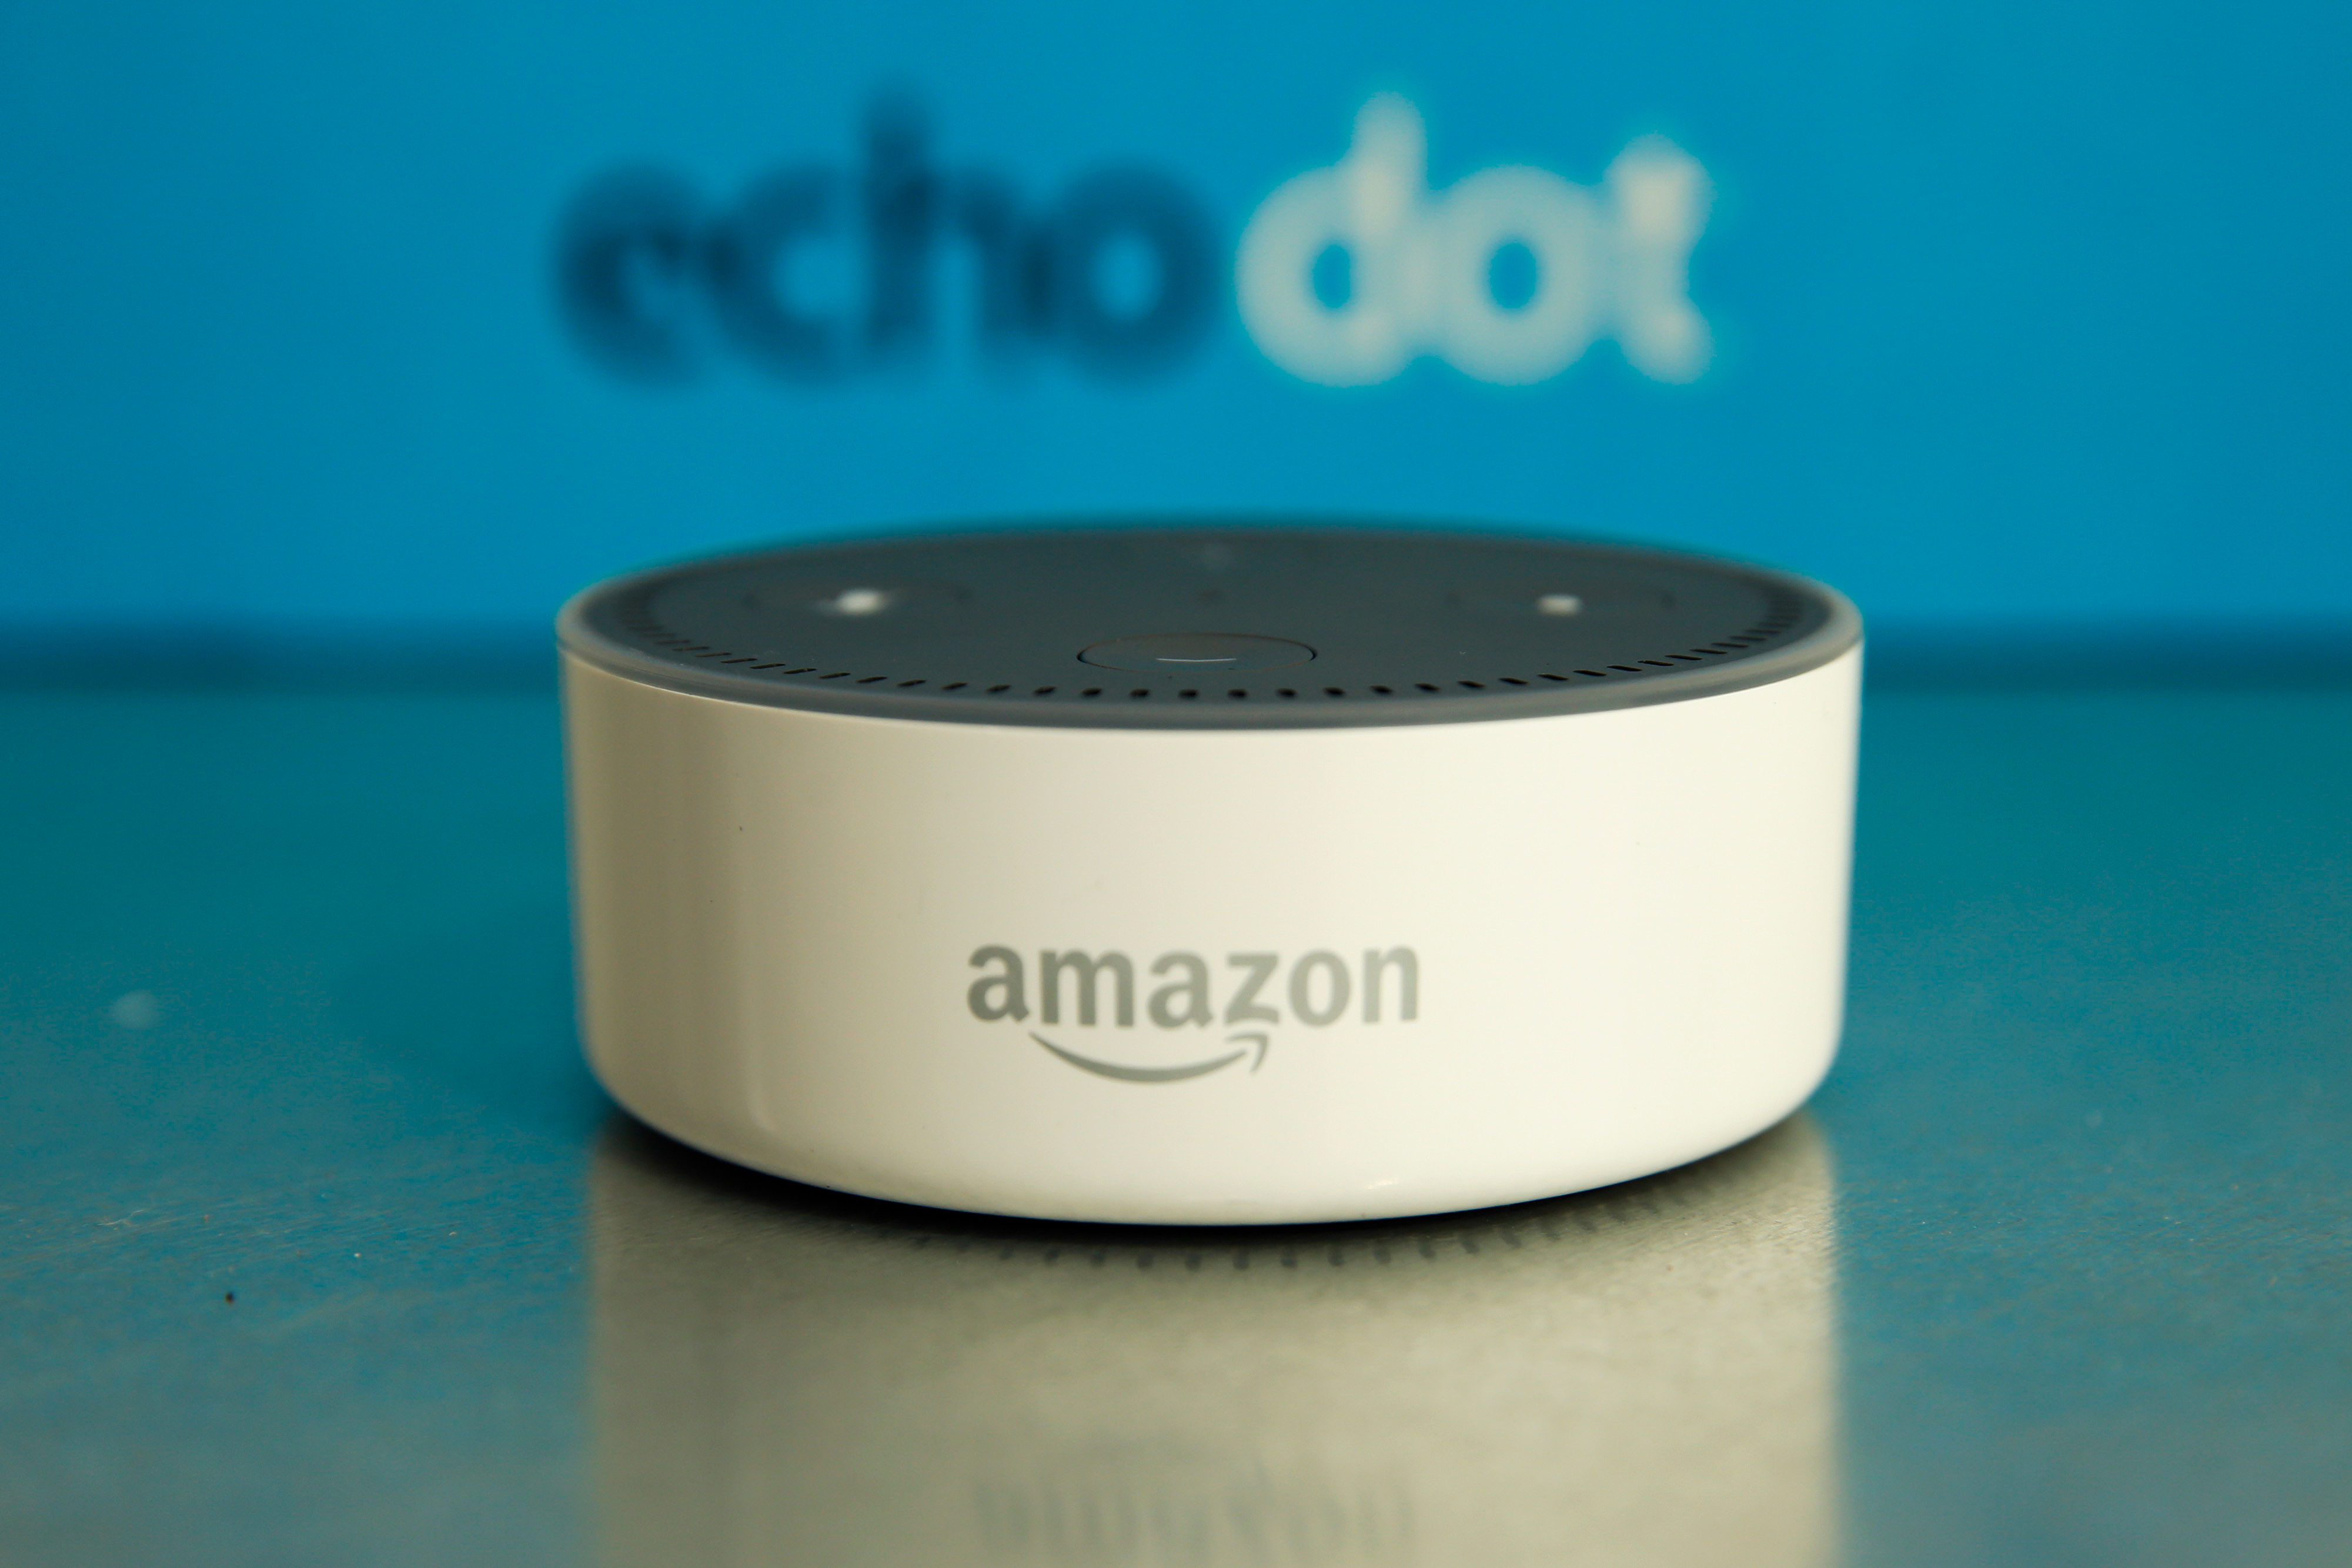 The Amazon "Echo Dot" device sits during the U.K. launch event for the Amazon.com Inc. Echo voice-controlled home assistant speaker in London, U.K., on Wednesday, Sept. 14, 2016. (Bloomberg&mdash;Bloomberg via Getty Images)